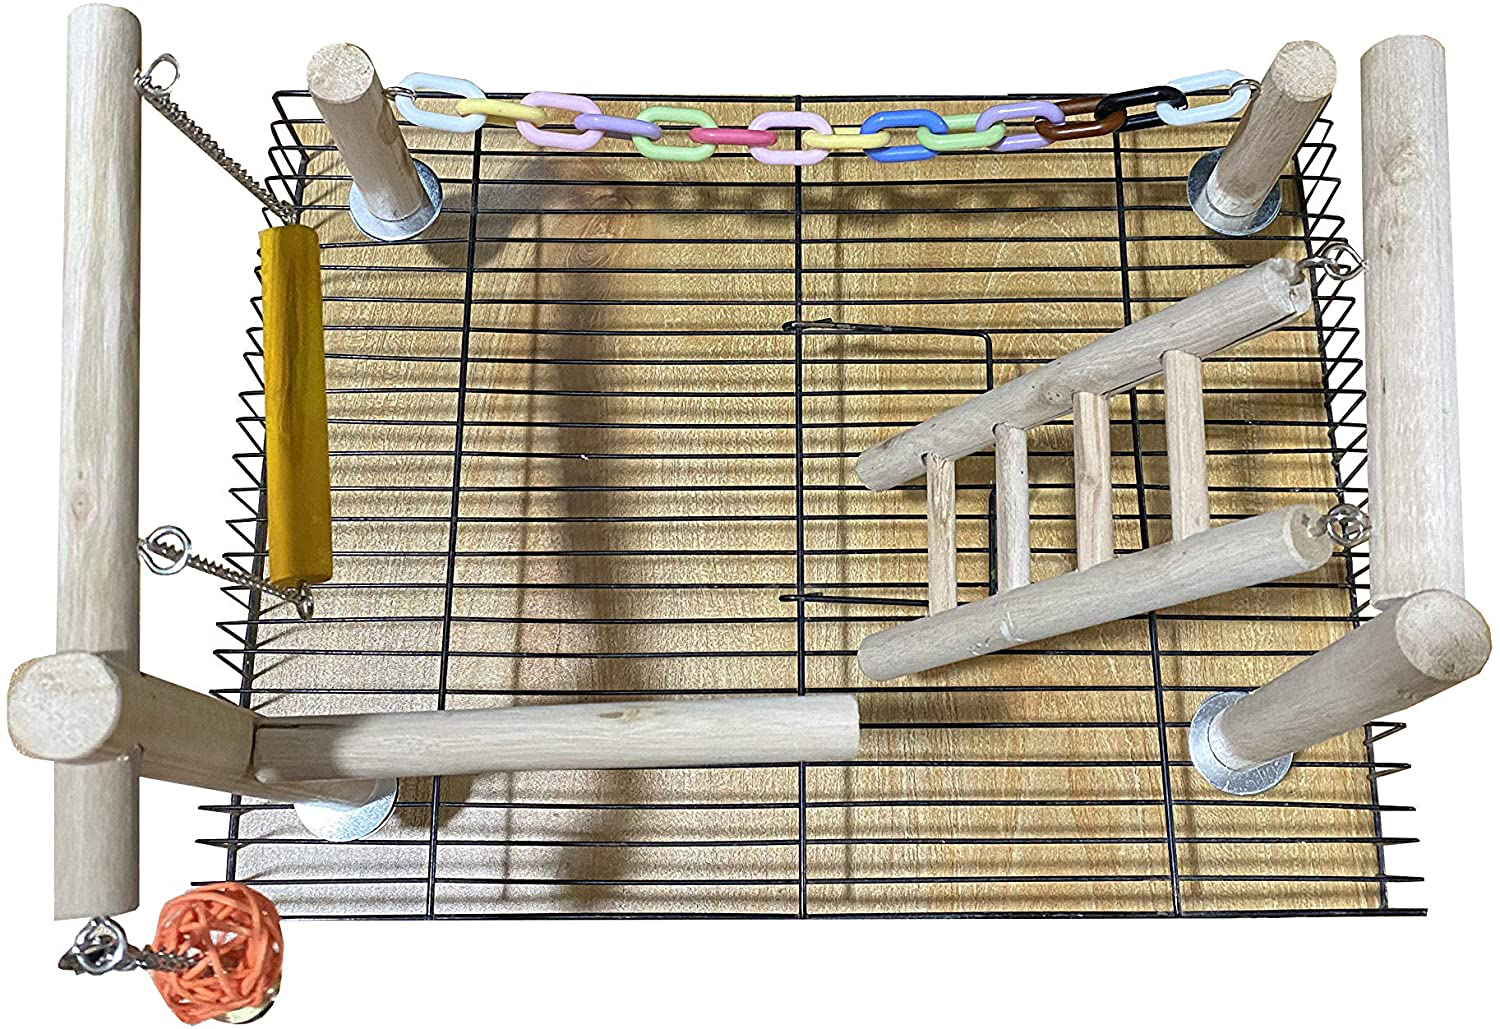 MINORPET Bird Cage Top Play Stand Ladder Swing Perches Stands Wood Play Gyms Playground and Bird Swing Conure for Green Cheeks, Baby Lovebird, Small Cockatoo Bird Cage Chewing Toys Sets